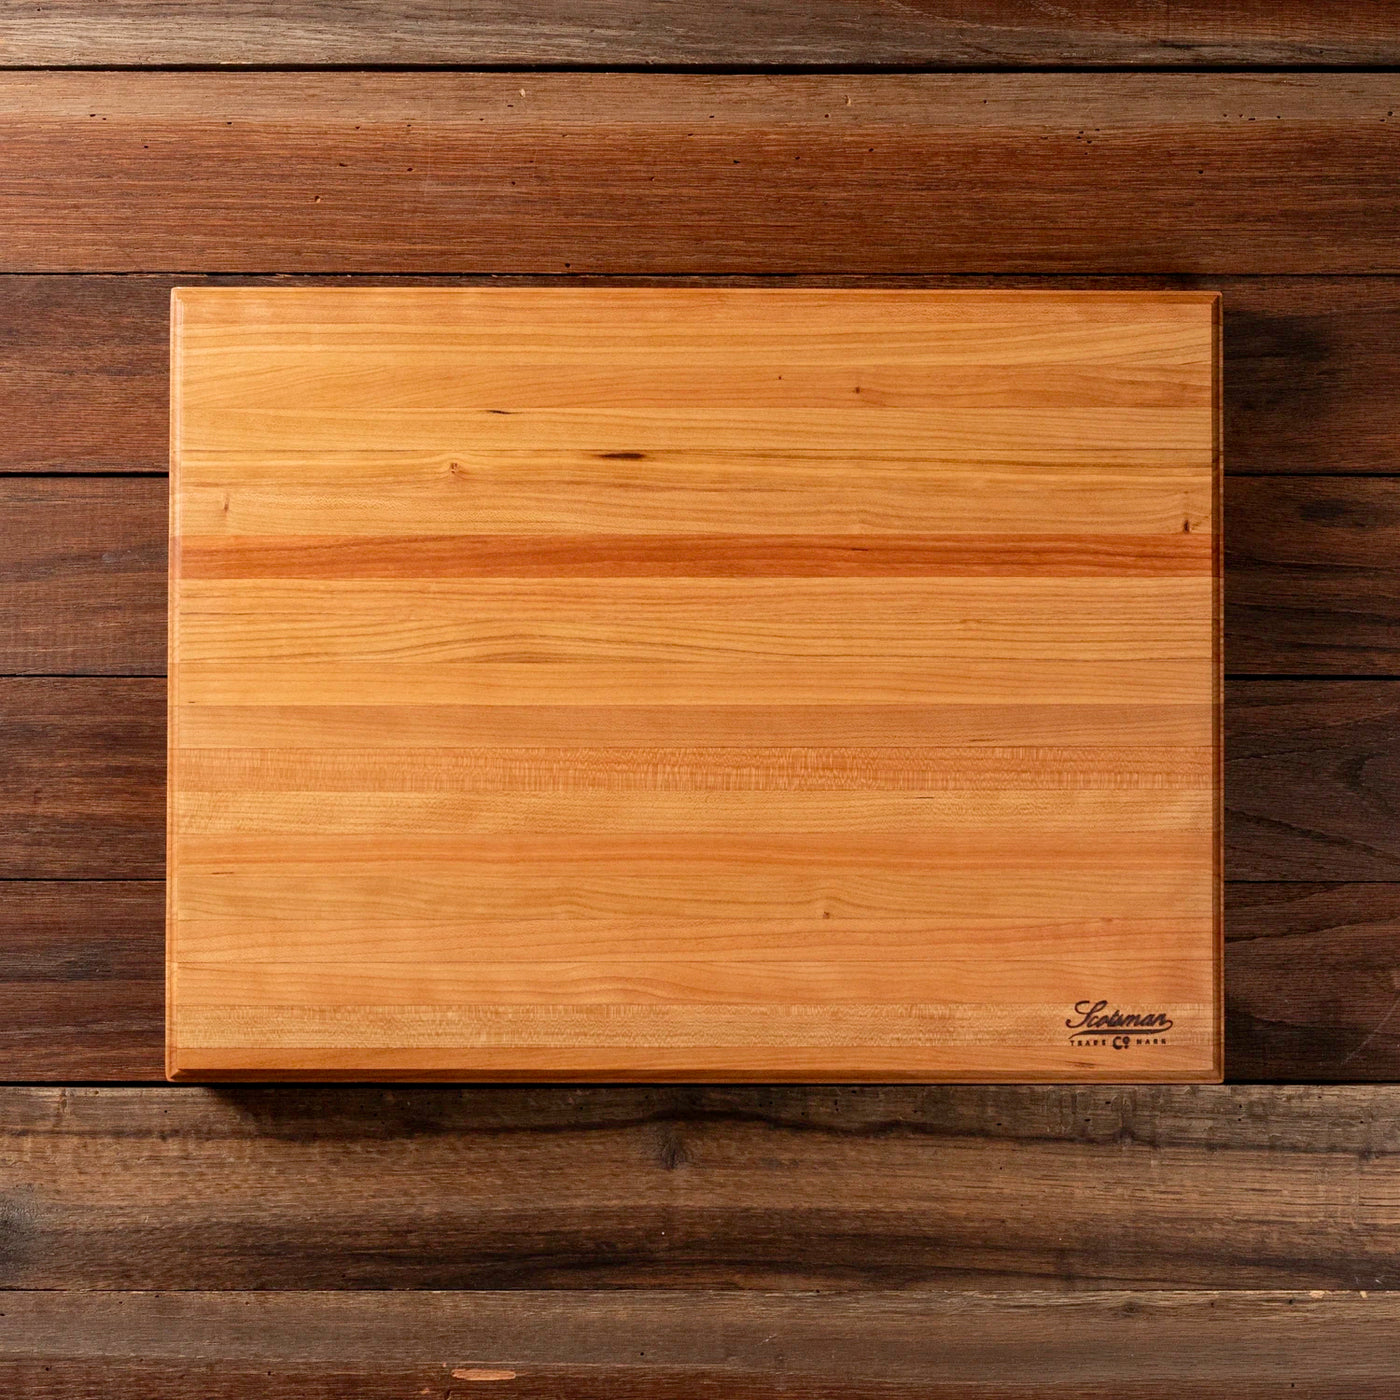 SIGNED Cherry Large Classic Butcher Block